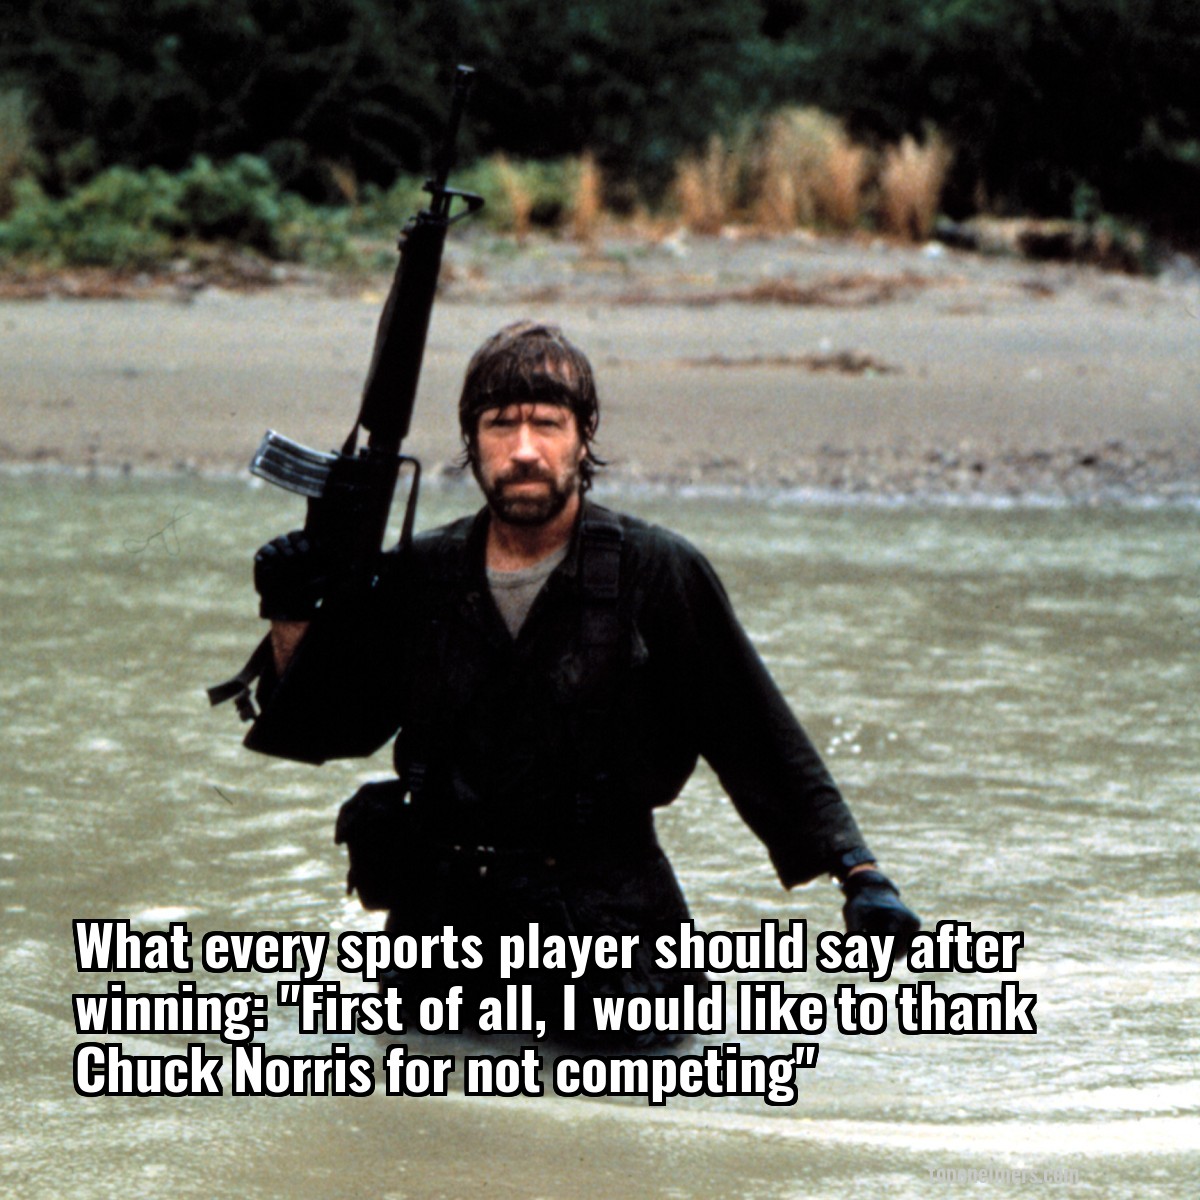 What every sports player should say after winning: "First of all, I would like to thank Chuck Norris for not competing"